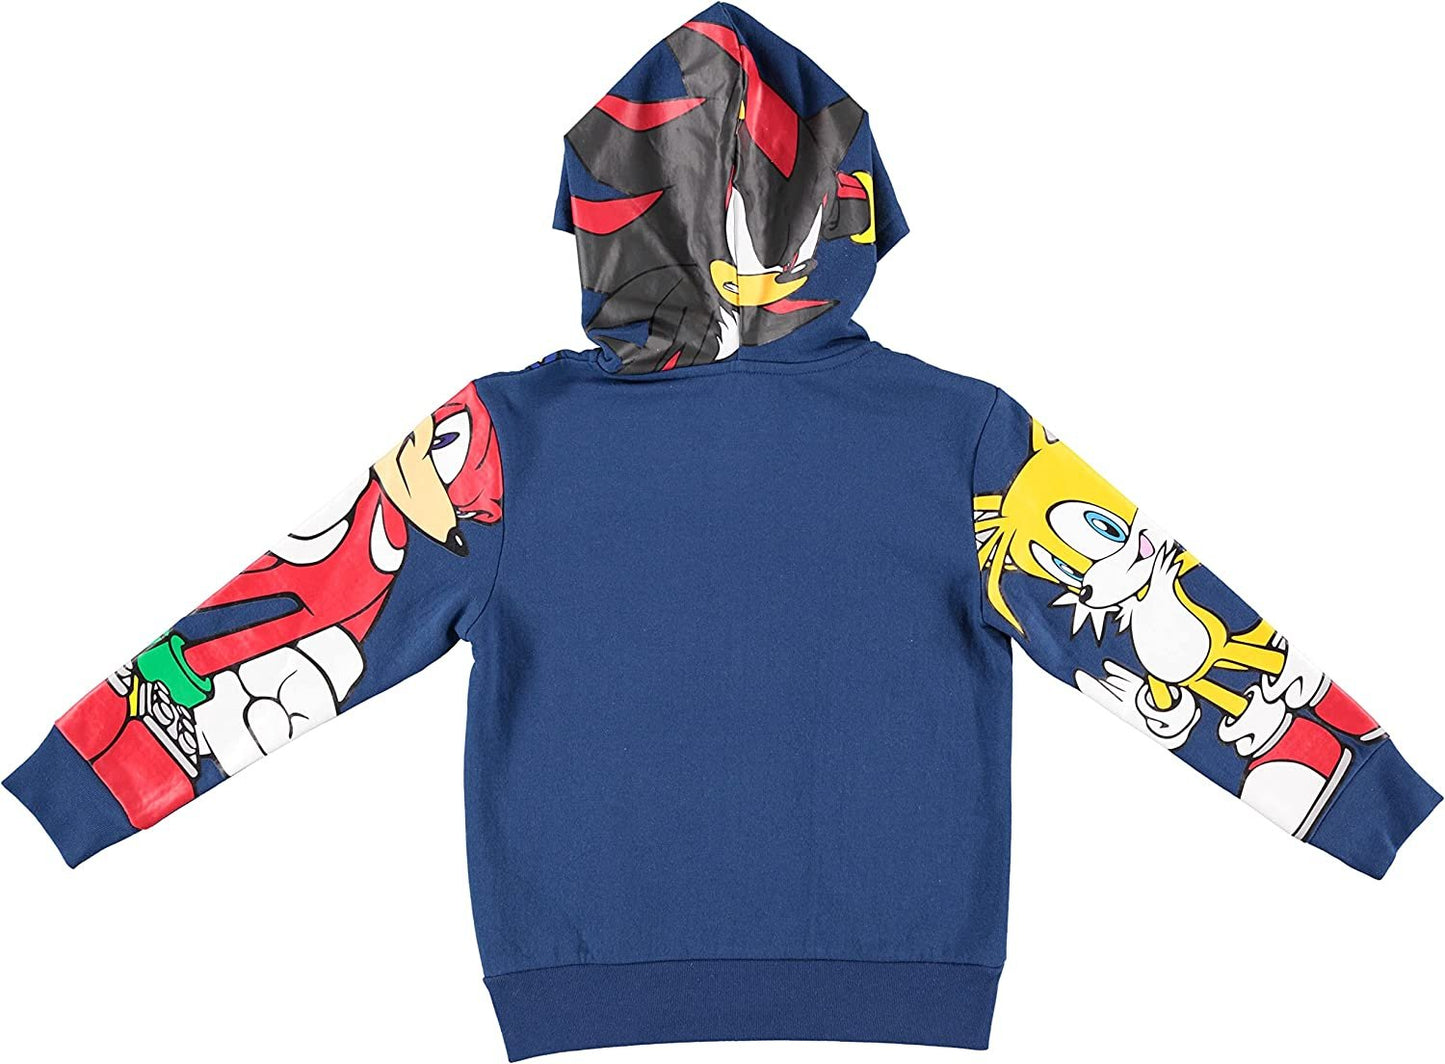 Boys Sonic The Hedgehog Costume Zip Up Fleece Hoodie-Featuring Sonic, Tails and Knuckles -Boys 4-20